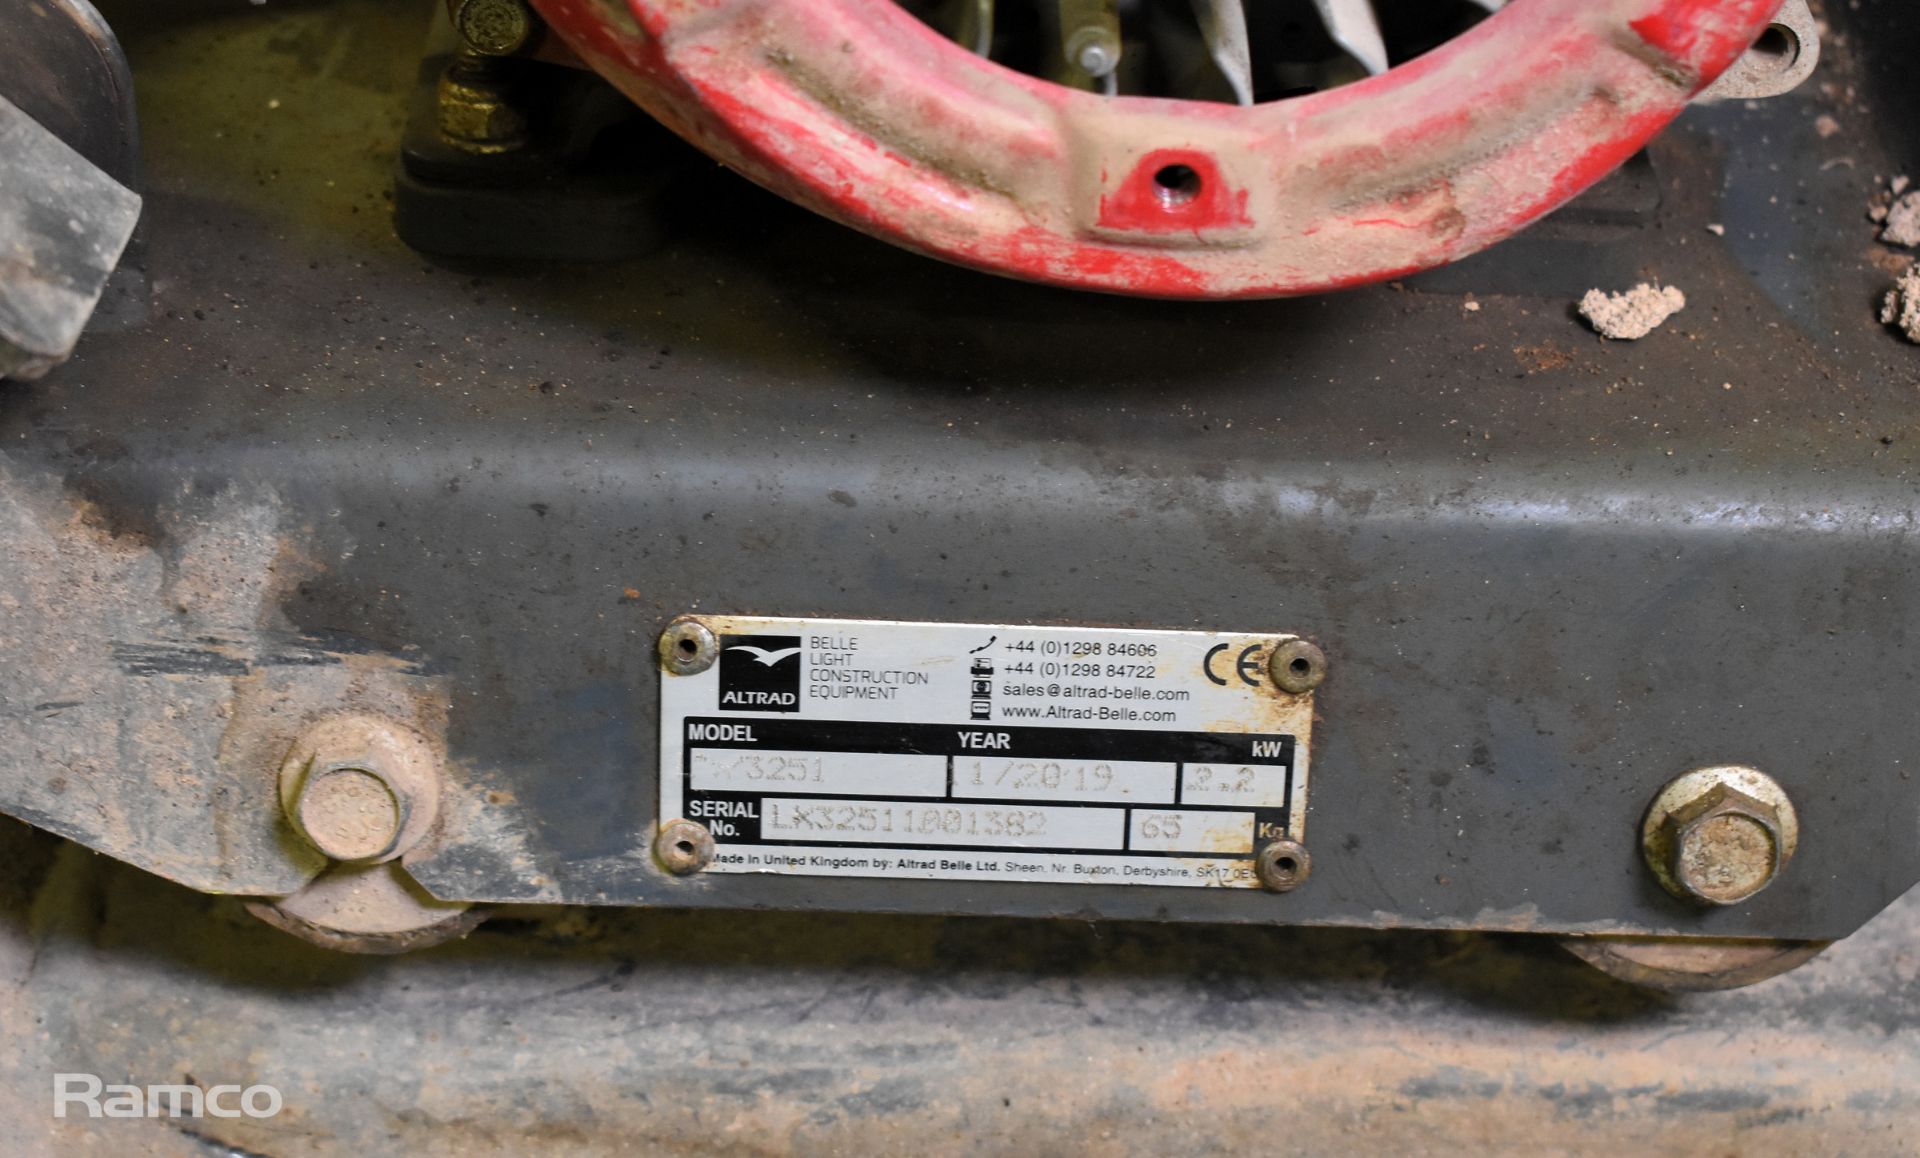 Altrad-Belle LX3251 320mm petrol plate compactor - SPARES OR REPAIRS - Image 3 of 7